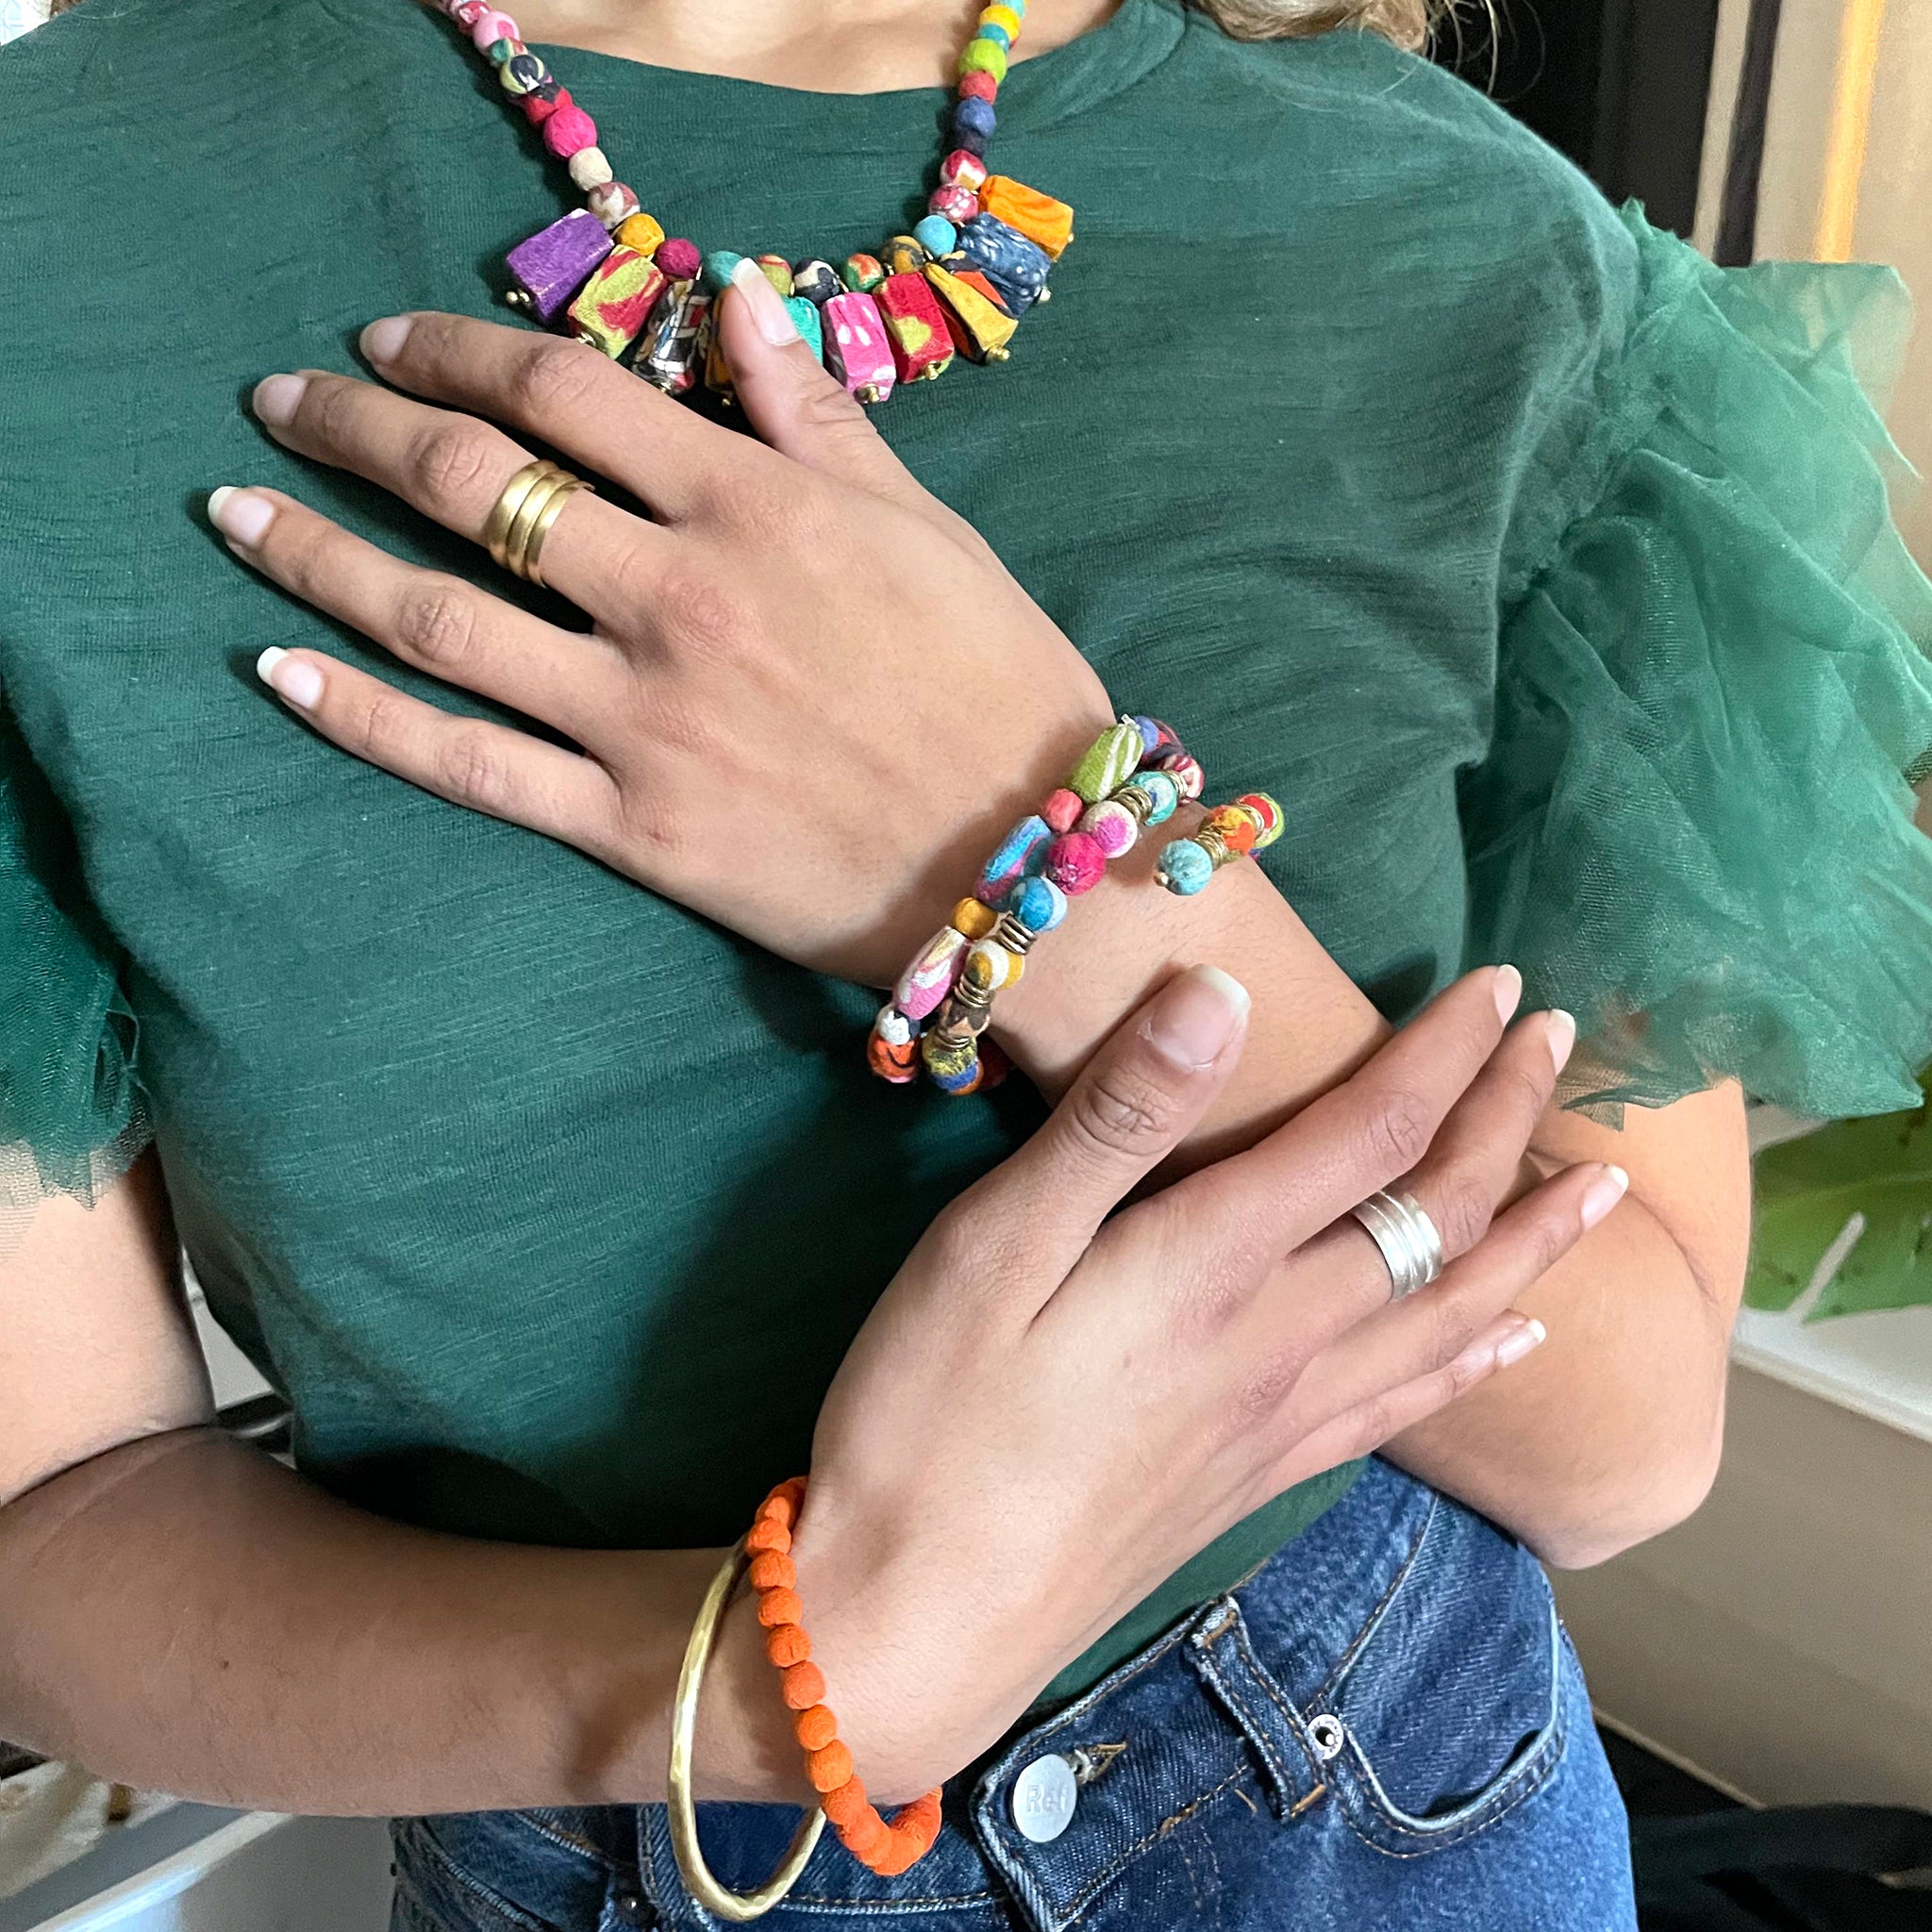 A woman places her hand on her chest, showcasing the bracelets on her wrist.